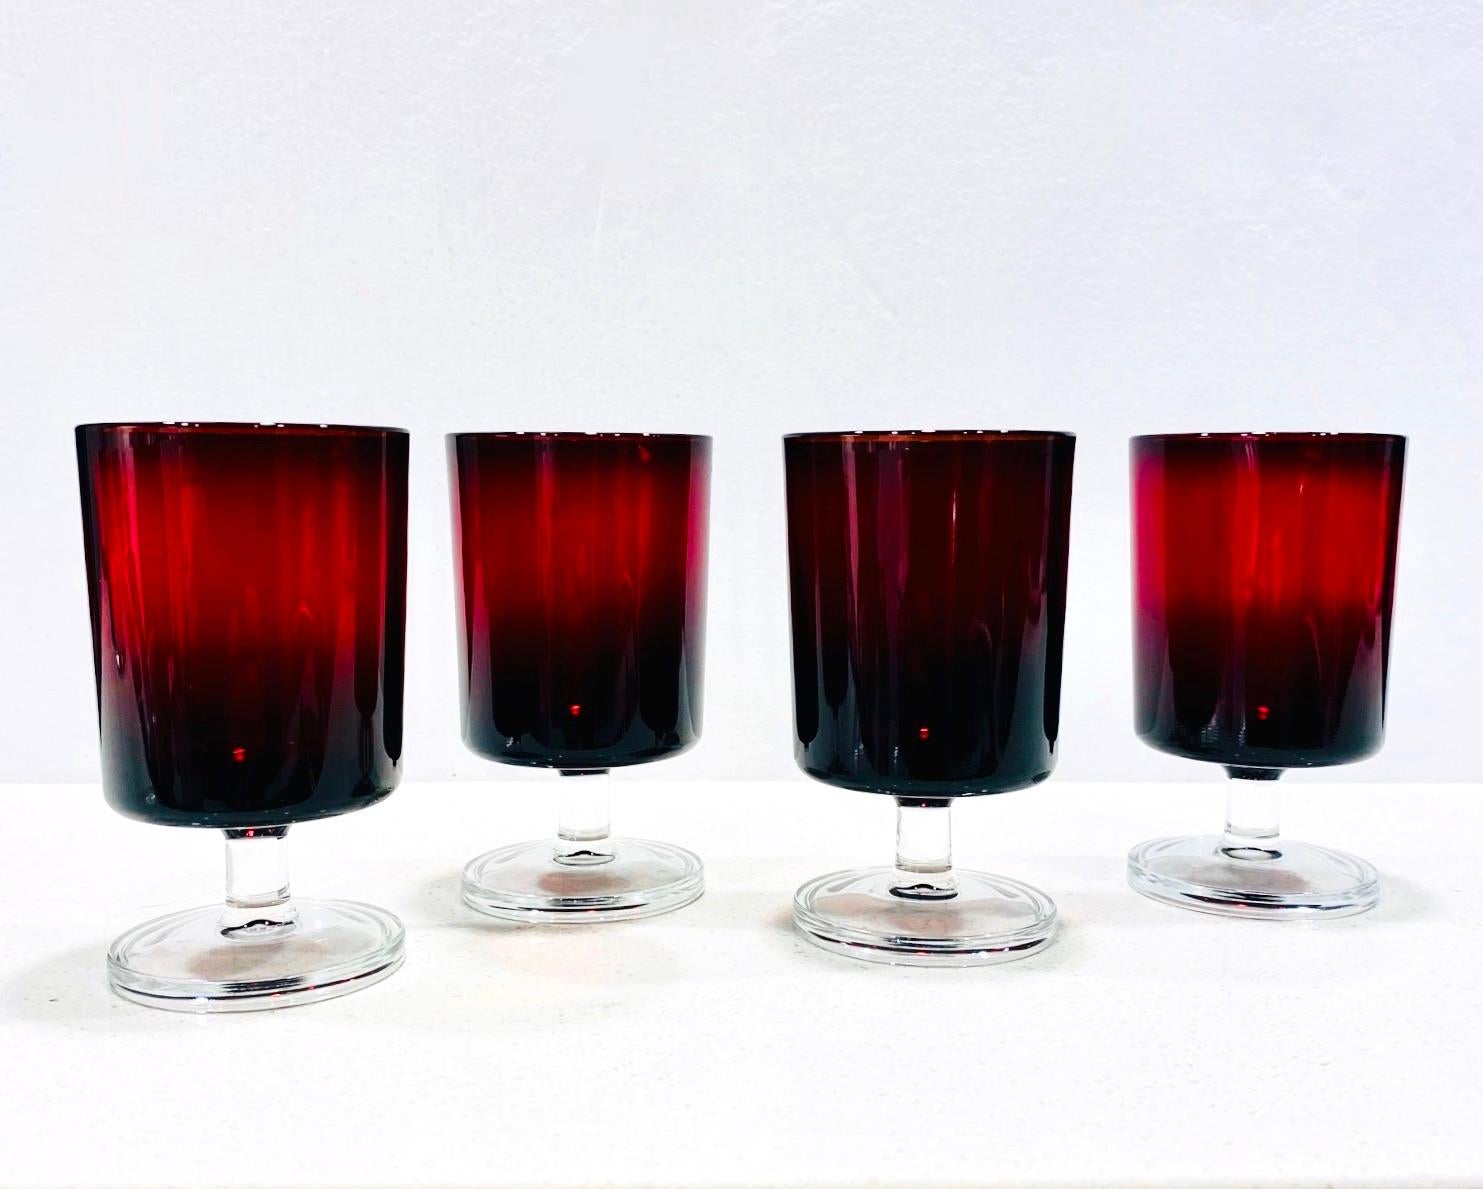 Set of four French Mid-Century Modern Arcoroc wine glasses in a gorgeous deep garnet red with clear glass stems. Glasses have Minimalist design with cylinder forms. Stamped 